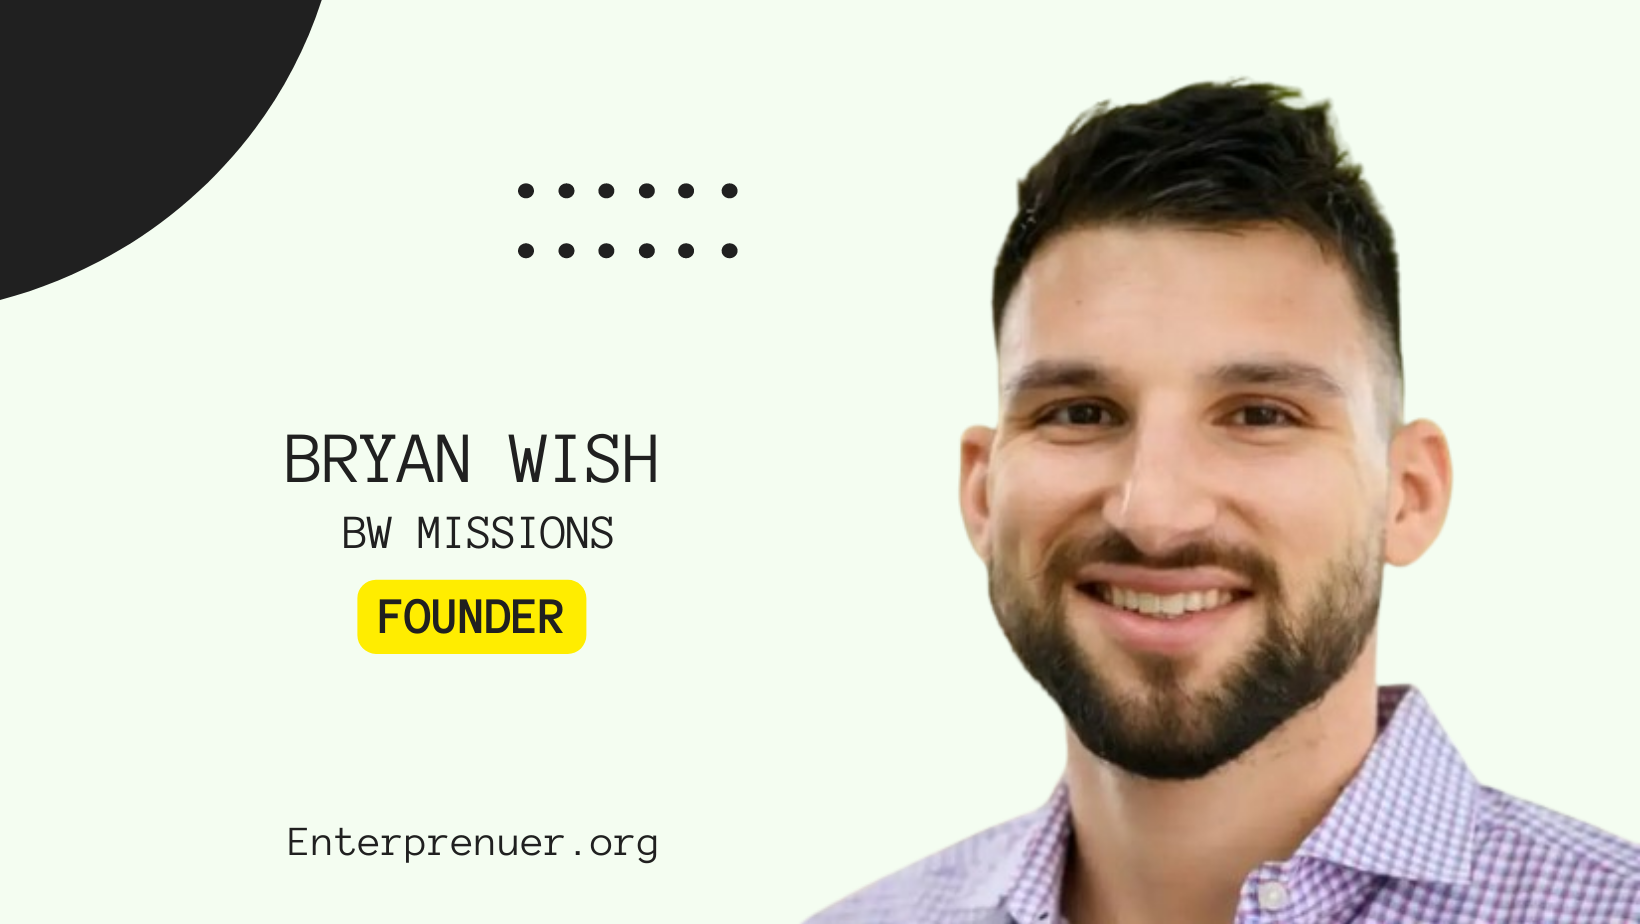 Bryan Wish, CEO & Founder of BW Missions